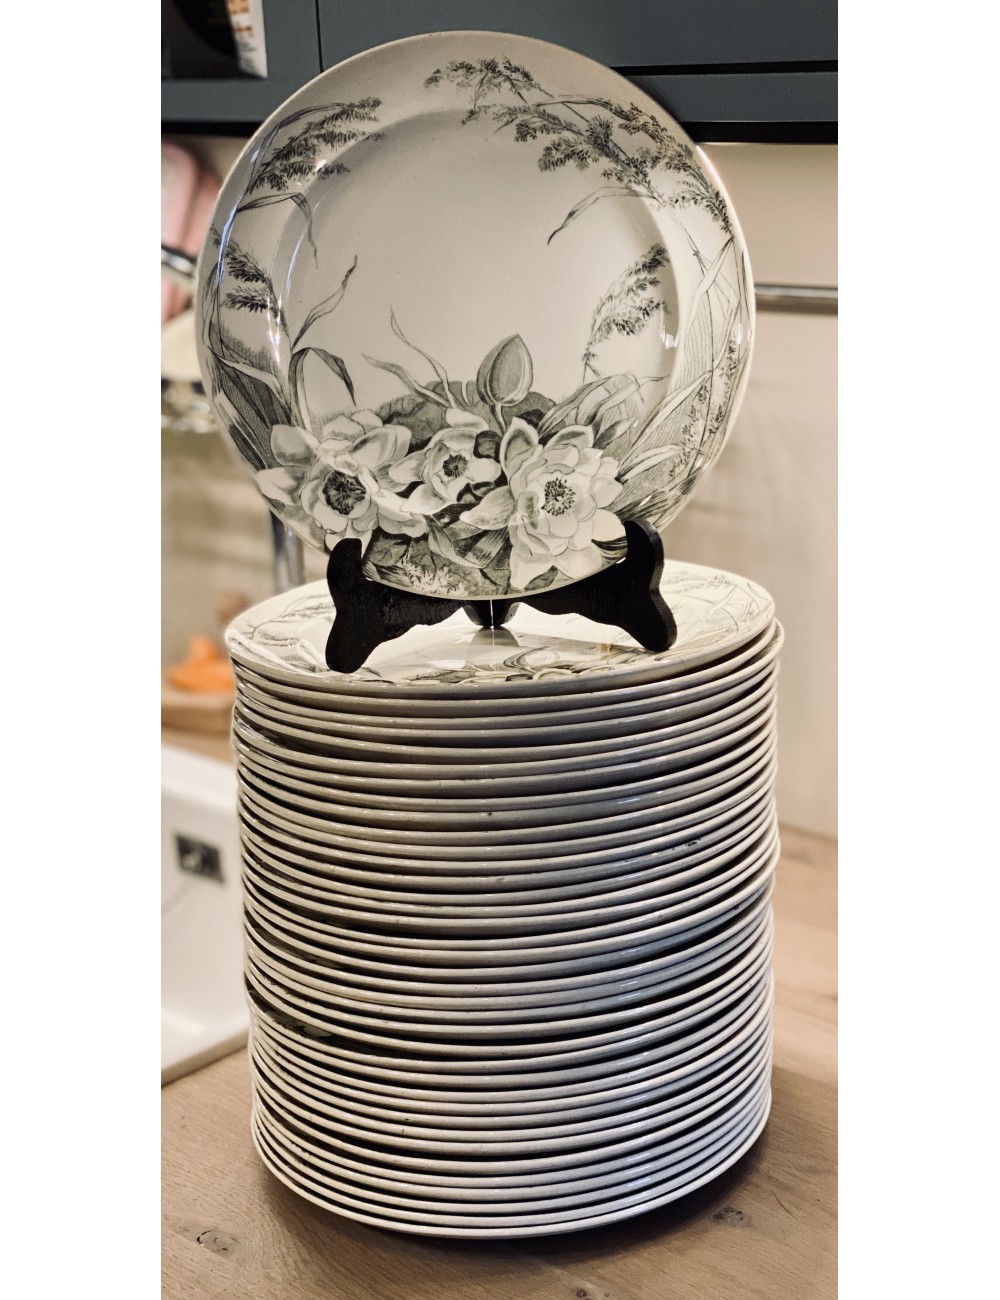 Dinerbord / dinner plate / assiette - George Jones & Sons (Stoke-on-Trent) - décor LILY